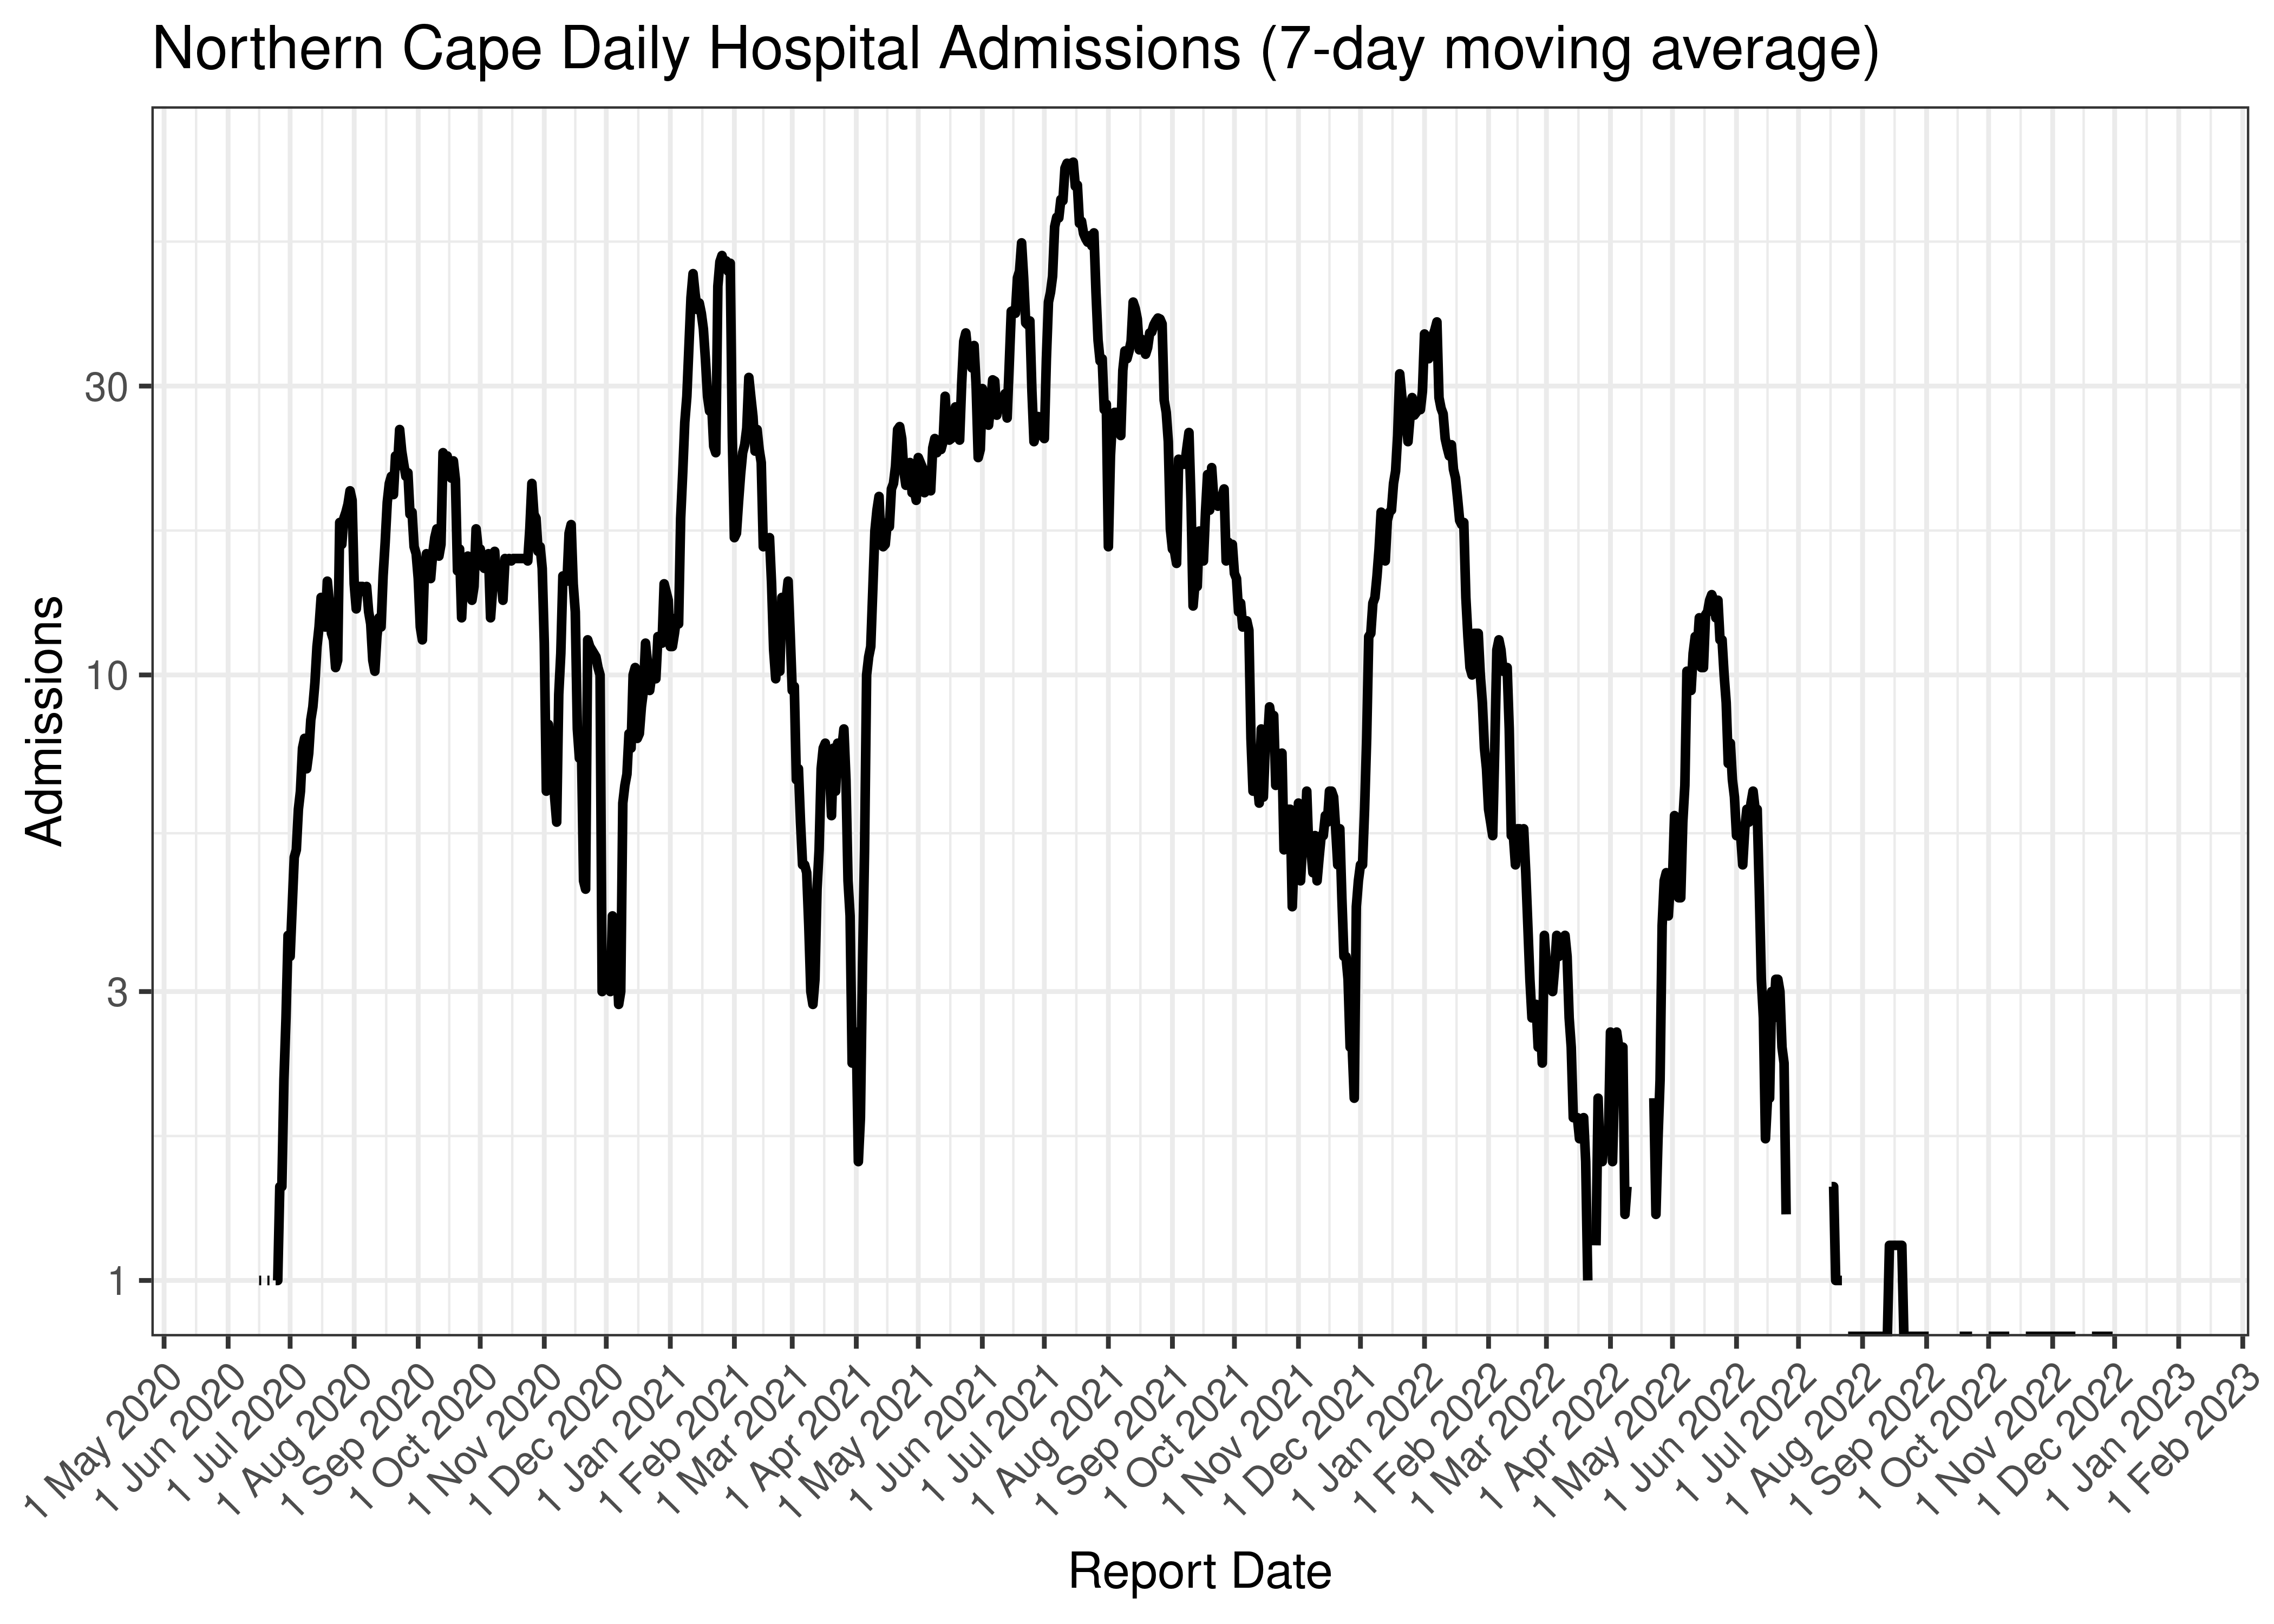 Northern Cape Daily Hospital Admissions (7-day moving average)